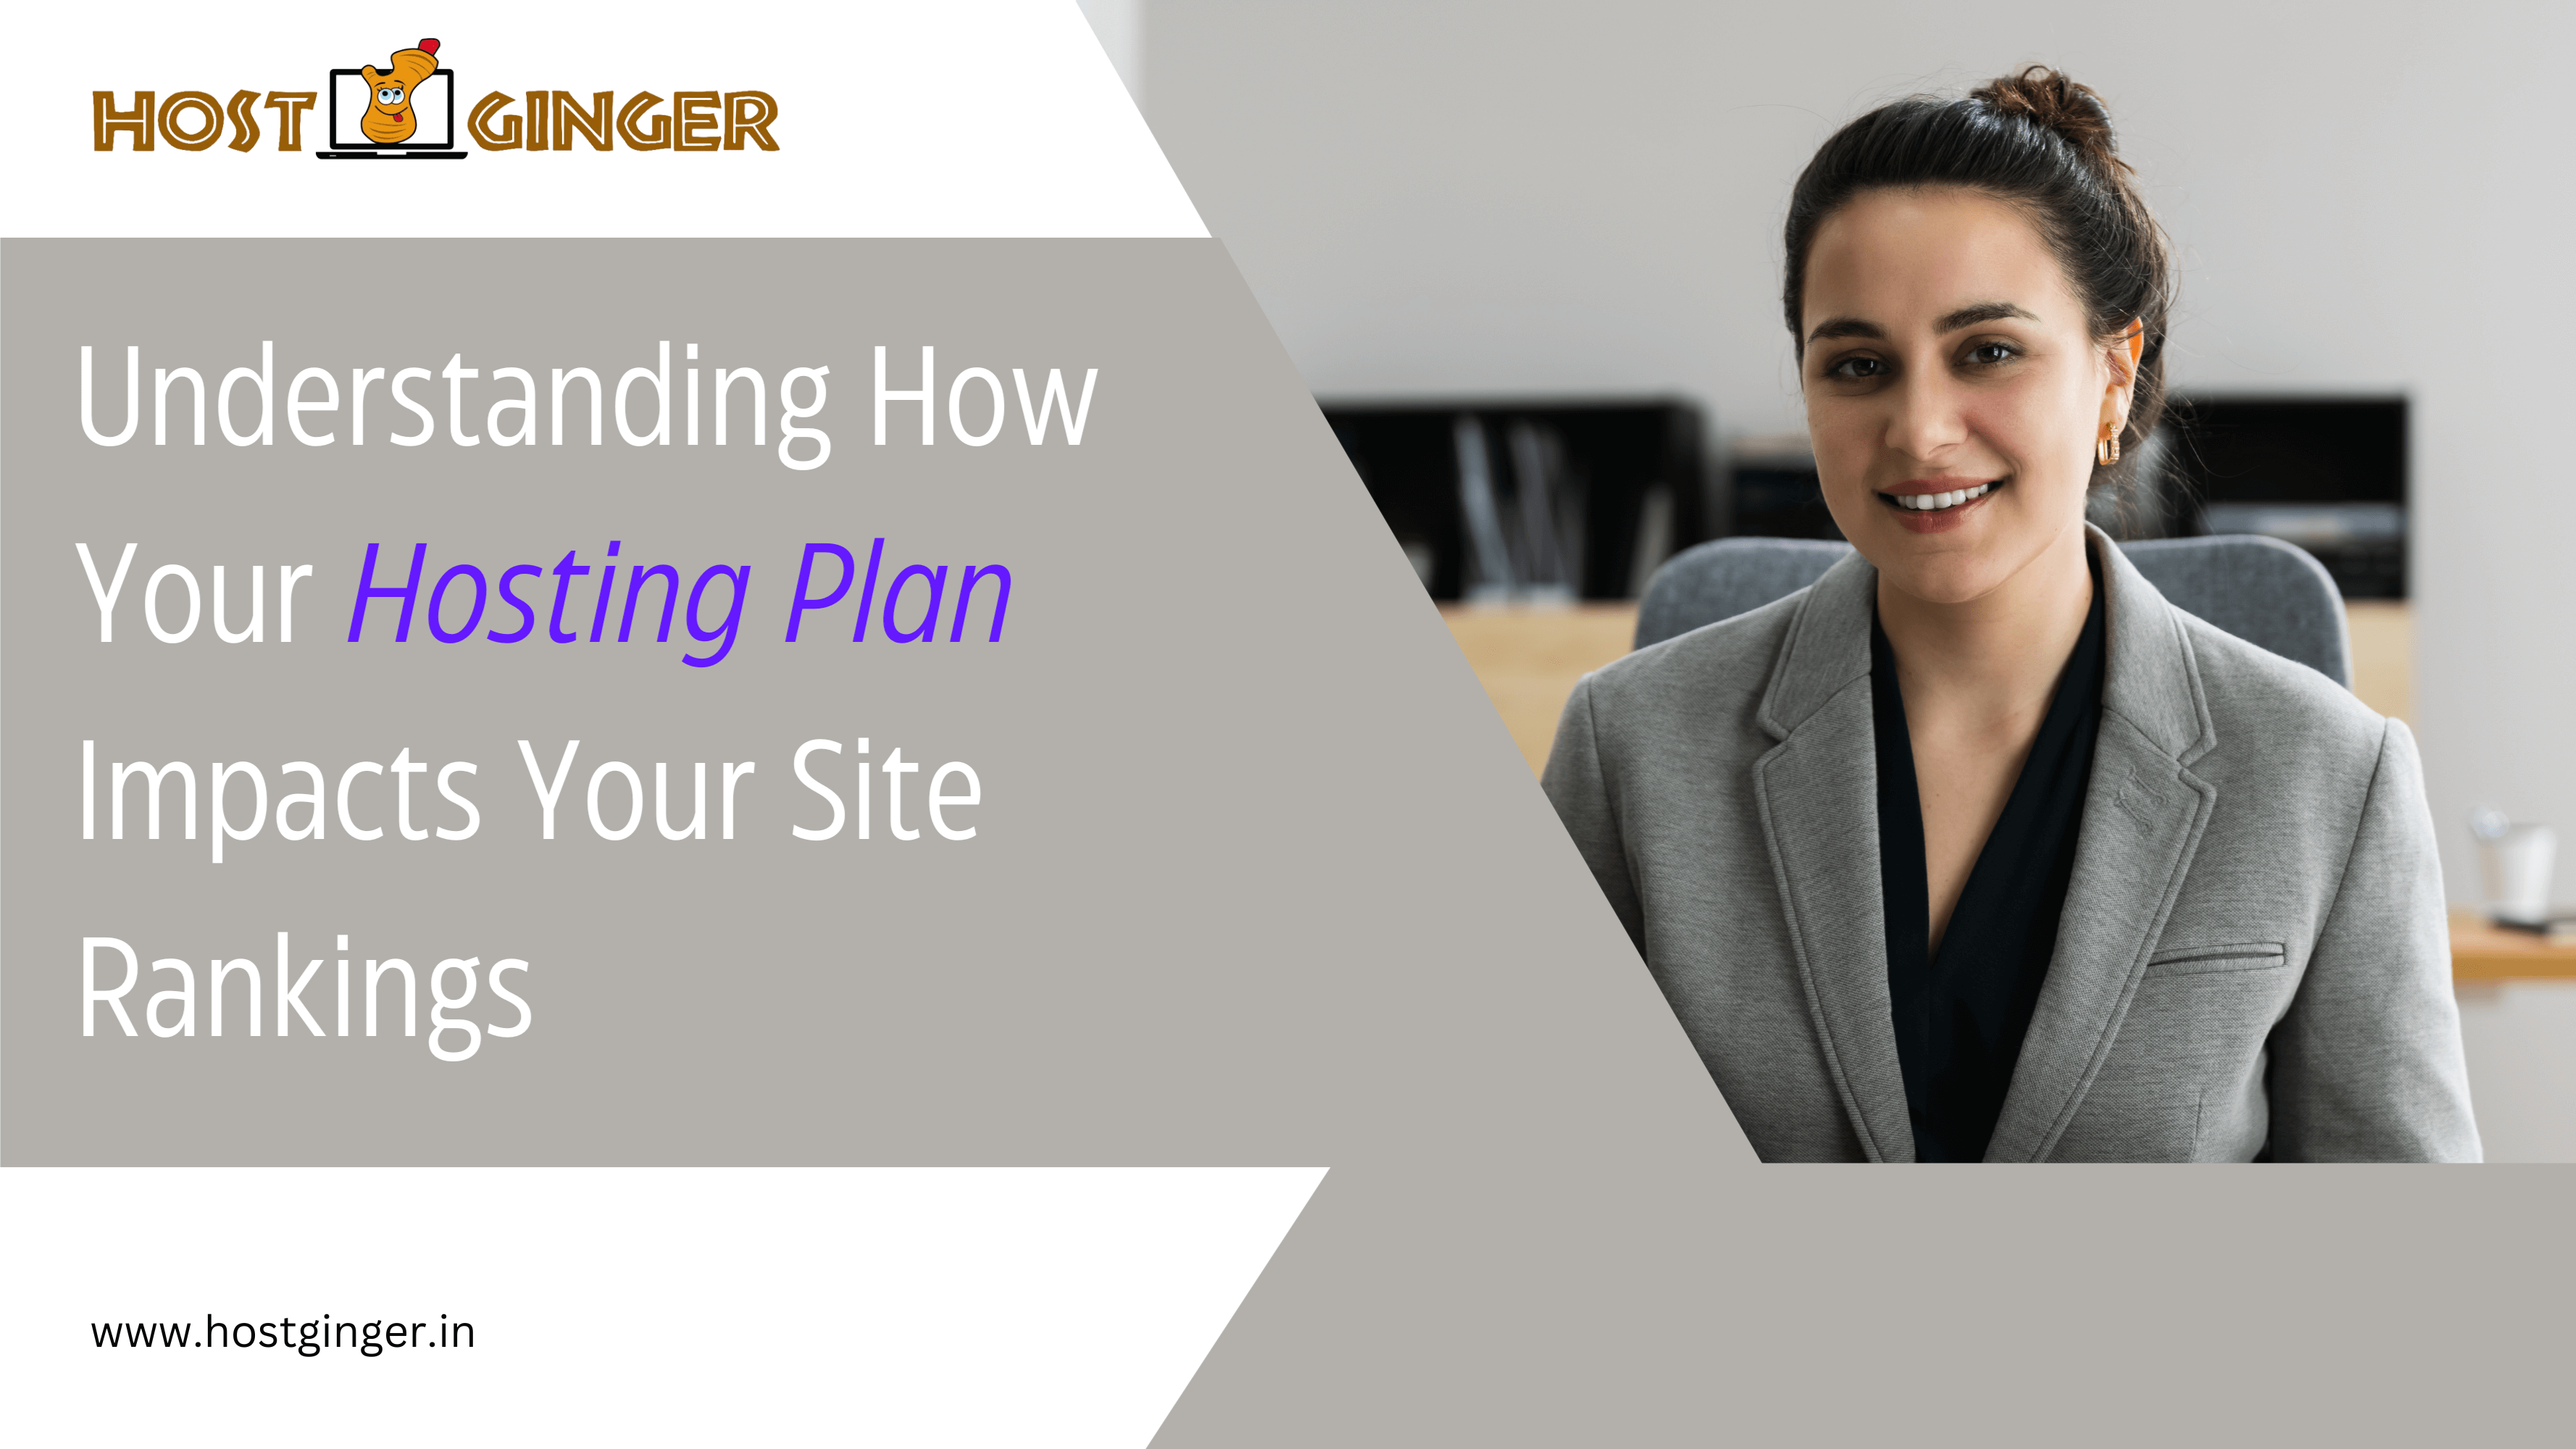 How Your Hosting Plan Impacts Your Site Rankings